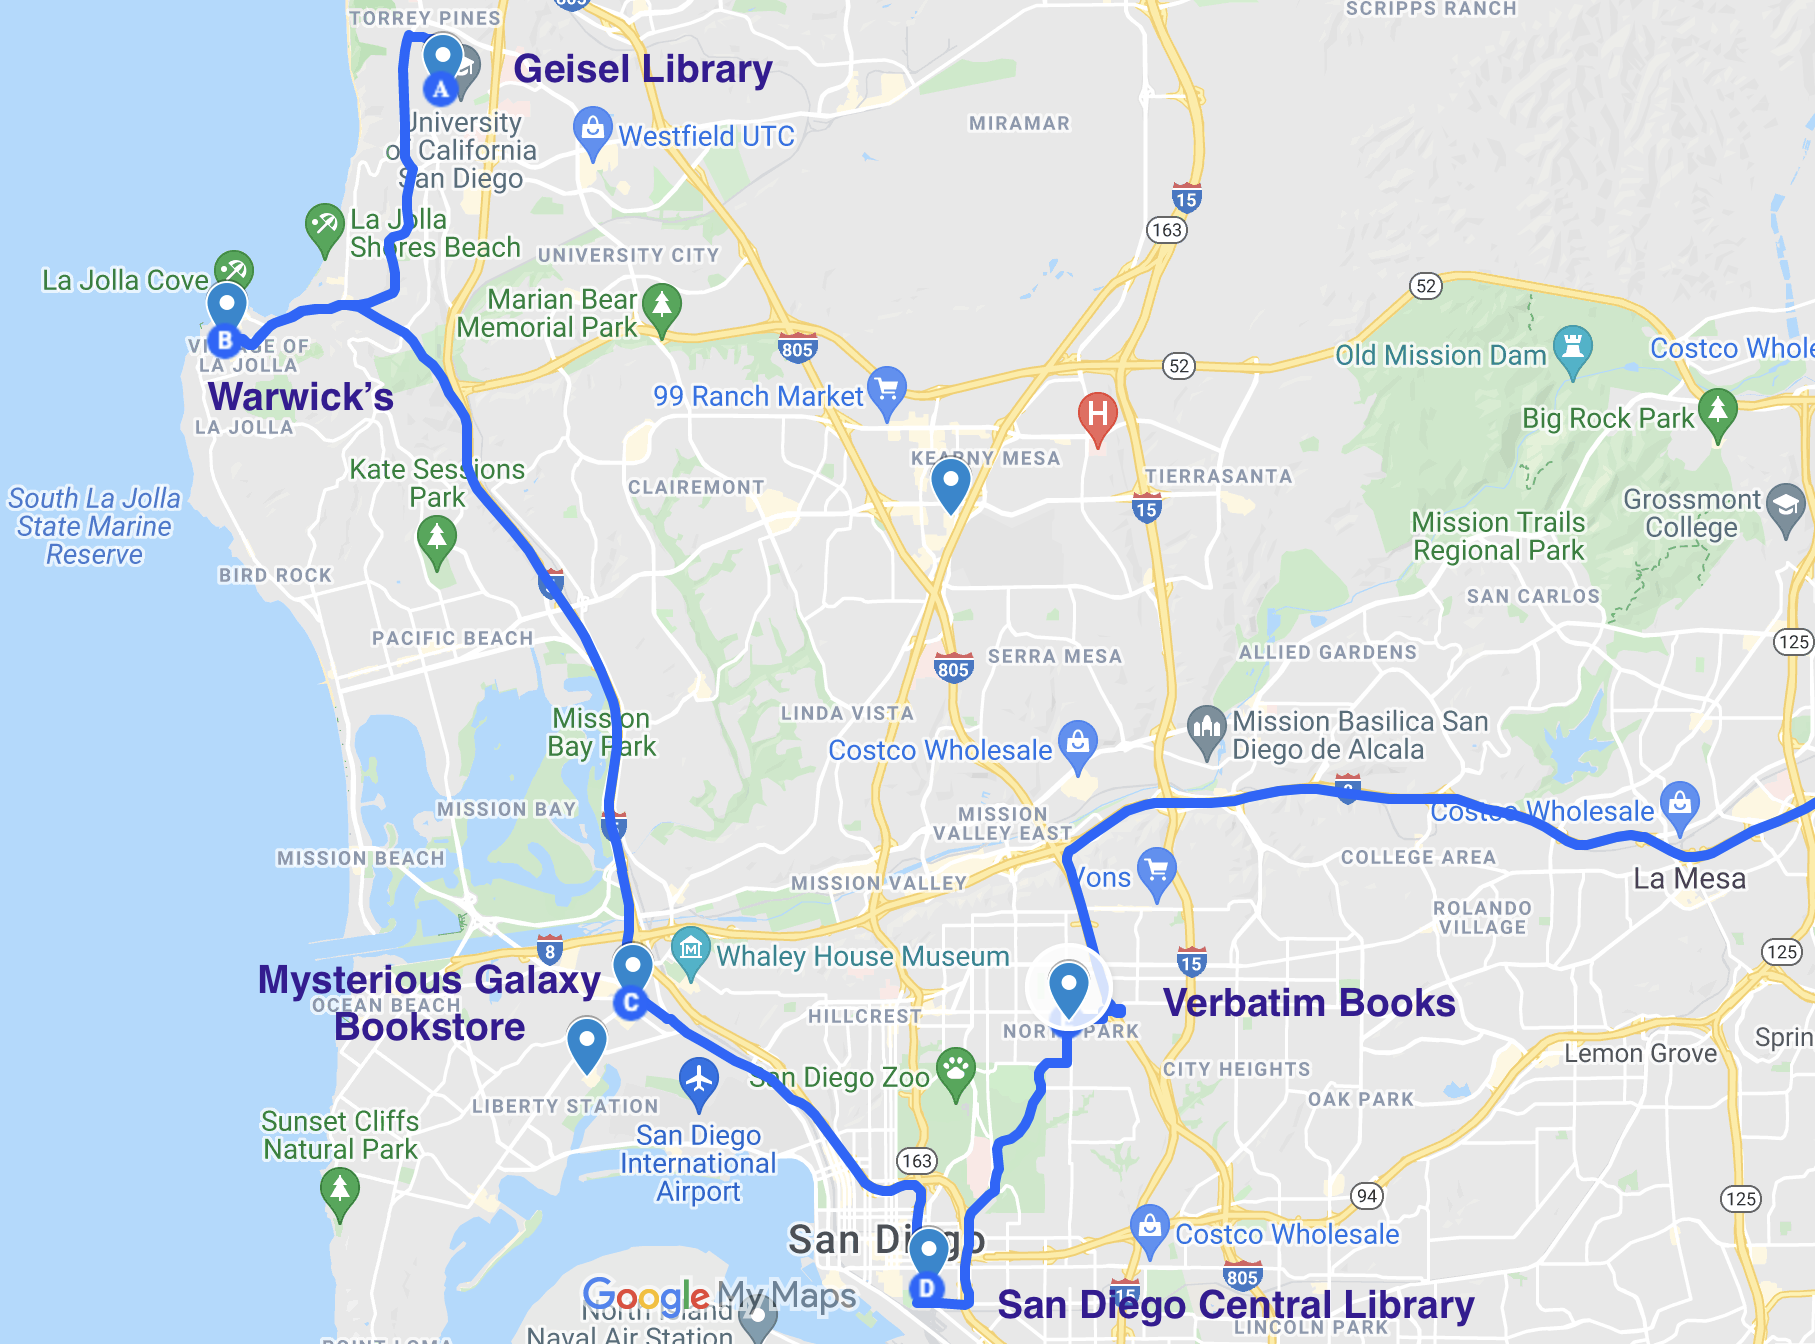 literary stops marked on a map of San Diego